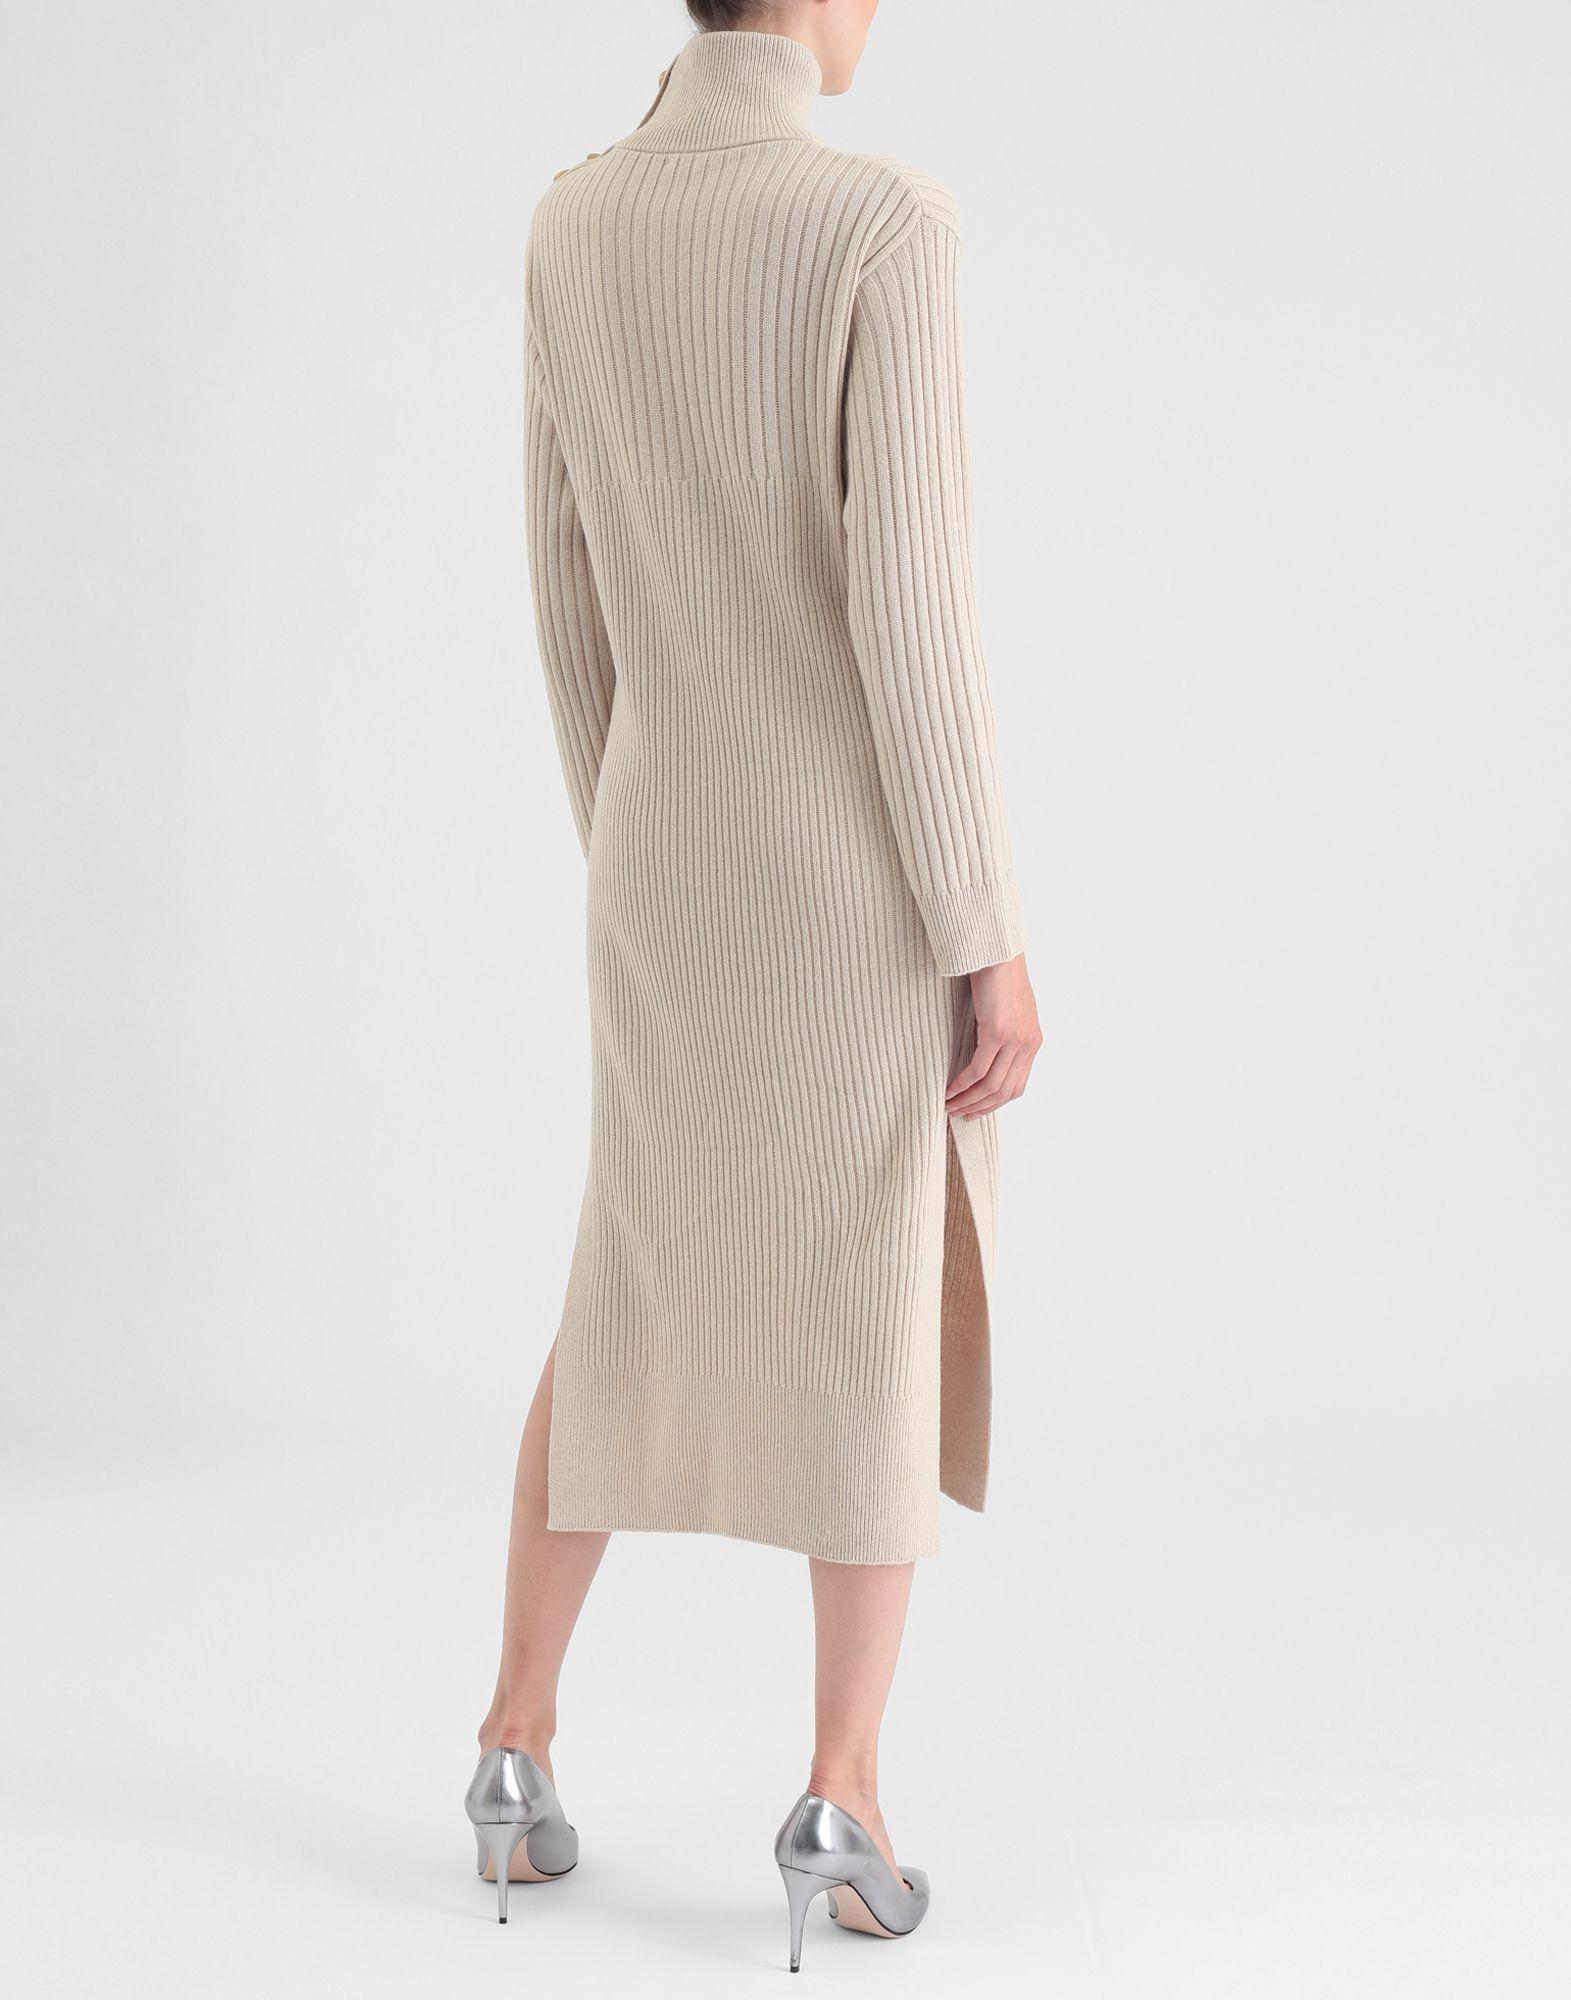 See By Chloé Wool 3/4 Length Dress in Beige (Natural) - Lyst